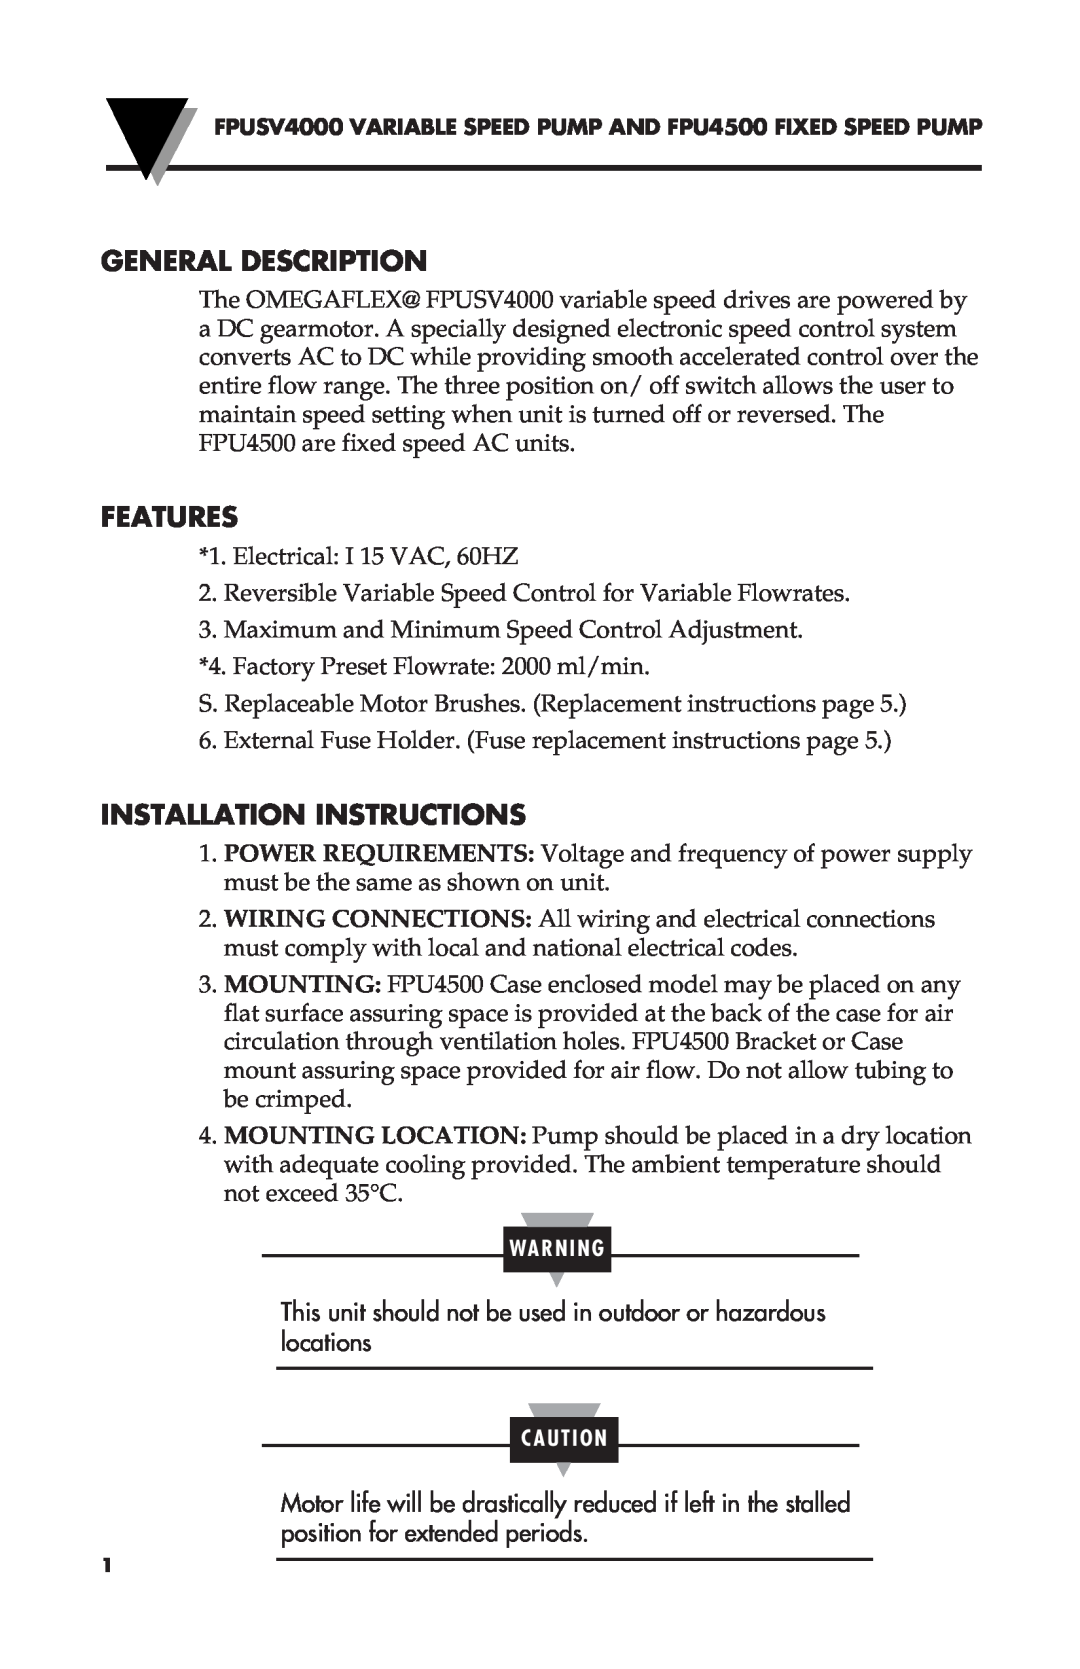 Omega Speaker Systems FPUSV4000, FPU4500 manual General Description, Features, Installation Instructions 